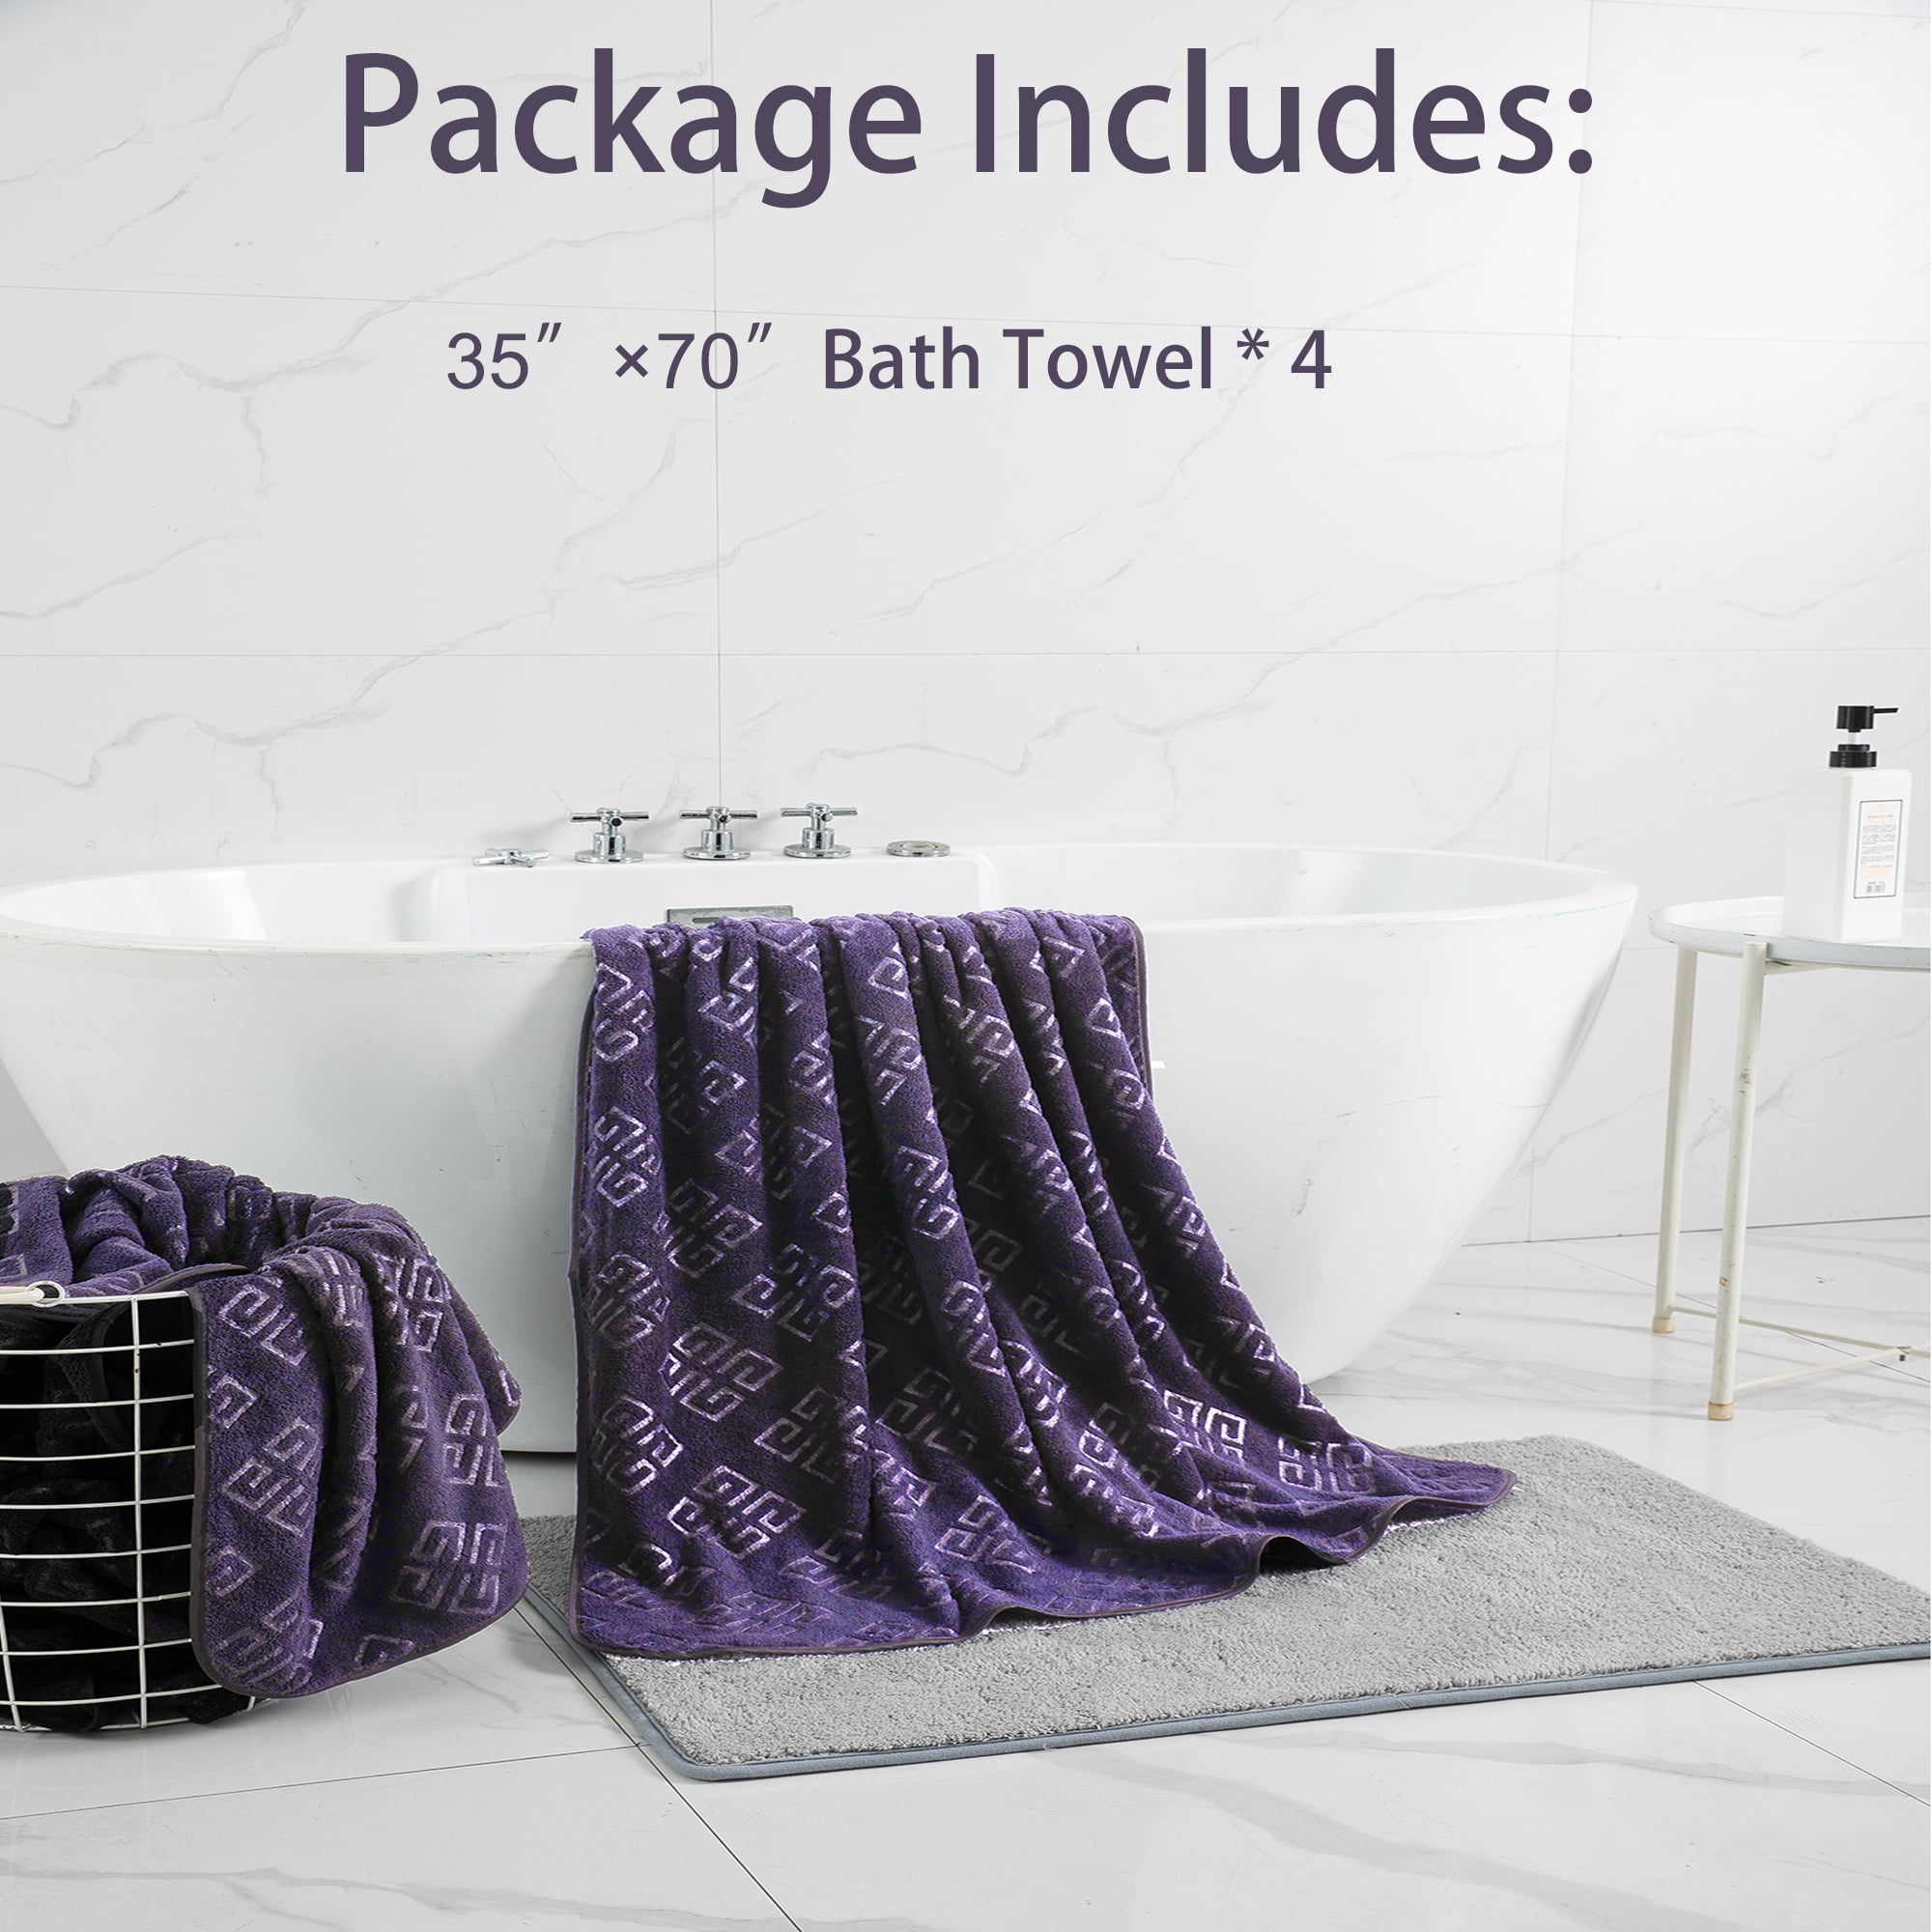 Bath Towel Household Microfiber Absorbent Oversized Thickened Towel Summer  Bath Sauna Women's Home Clothes Face Towels the Body